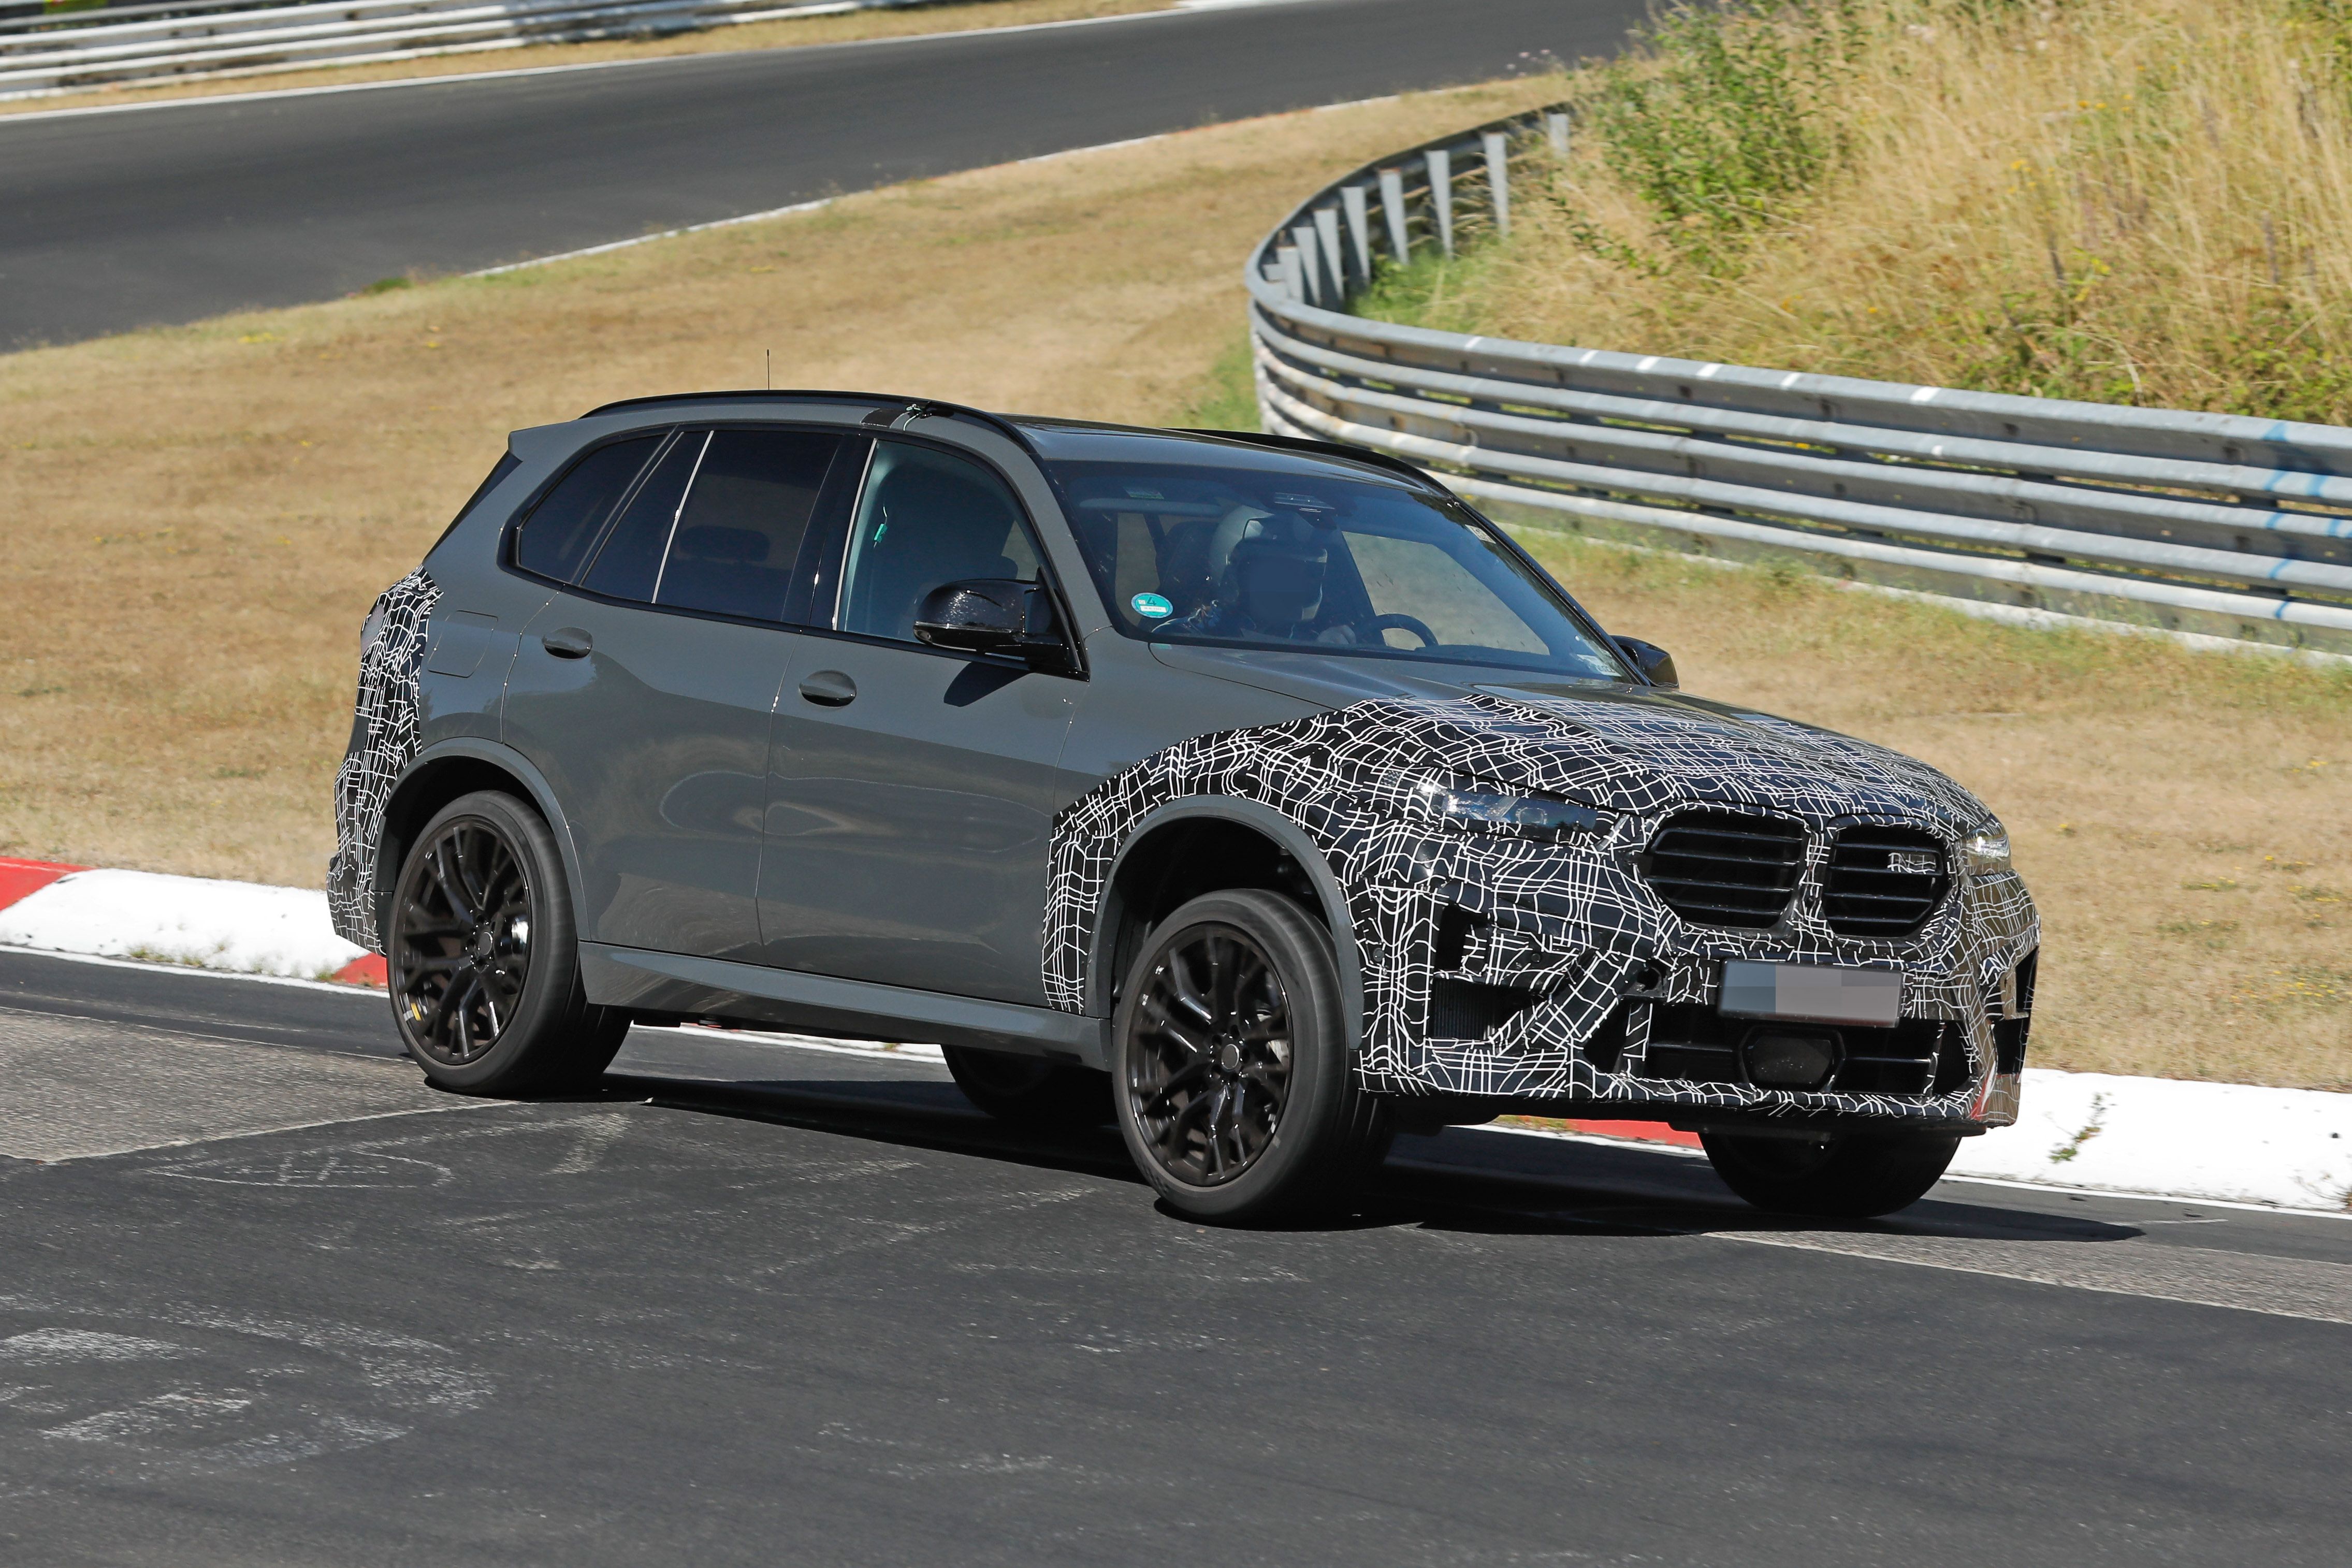 Spy Shots: An Early Look at the 2024 BMW X5 M | Flipboard